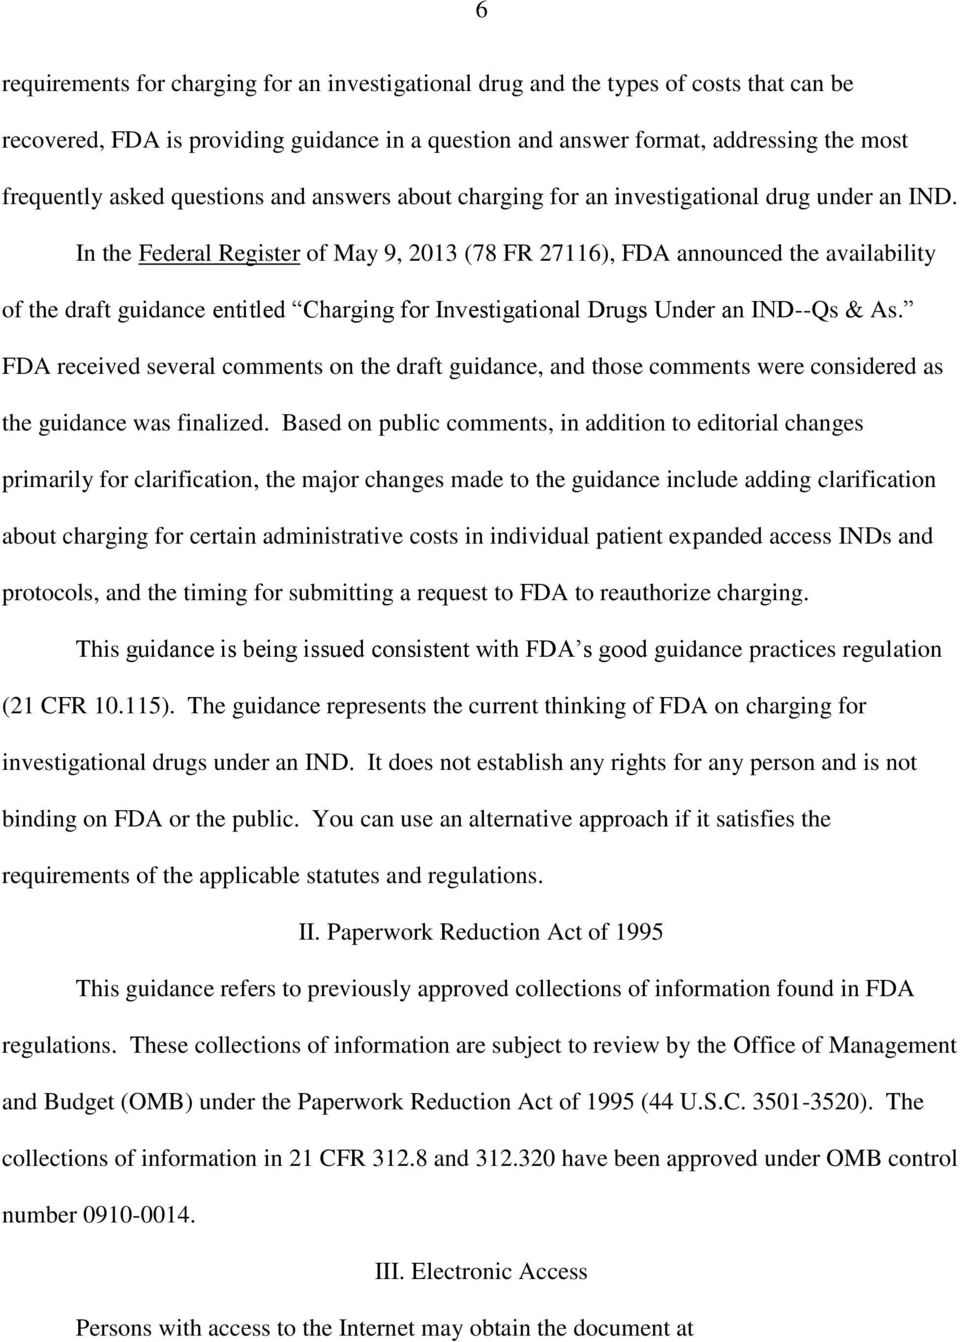 In the Federal Register of May 9, 2013 (78 FR 27116), FDA announced the availability of the draft guidance entitled Charging for Investigational Drugs Under an IND--Qs & As.